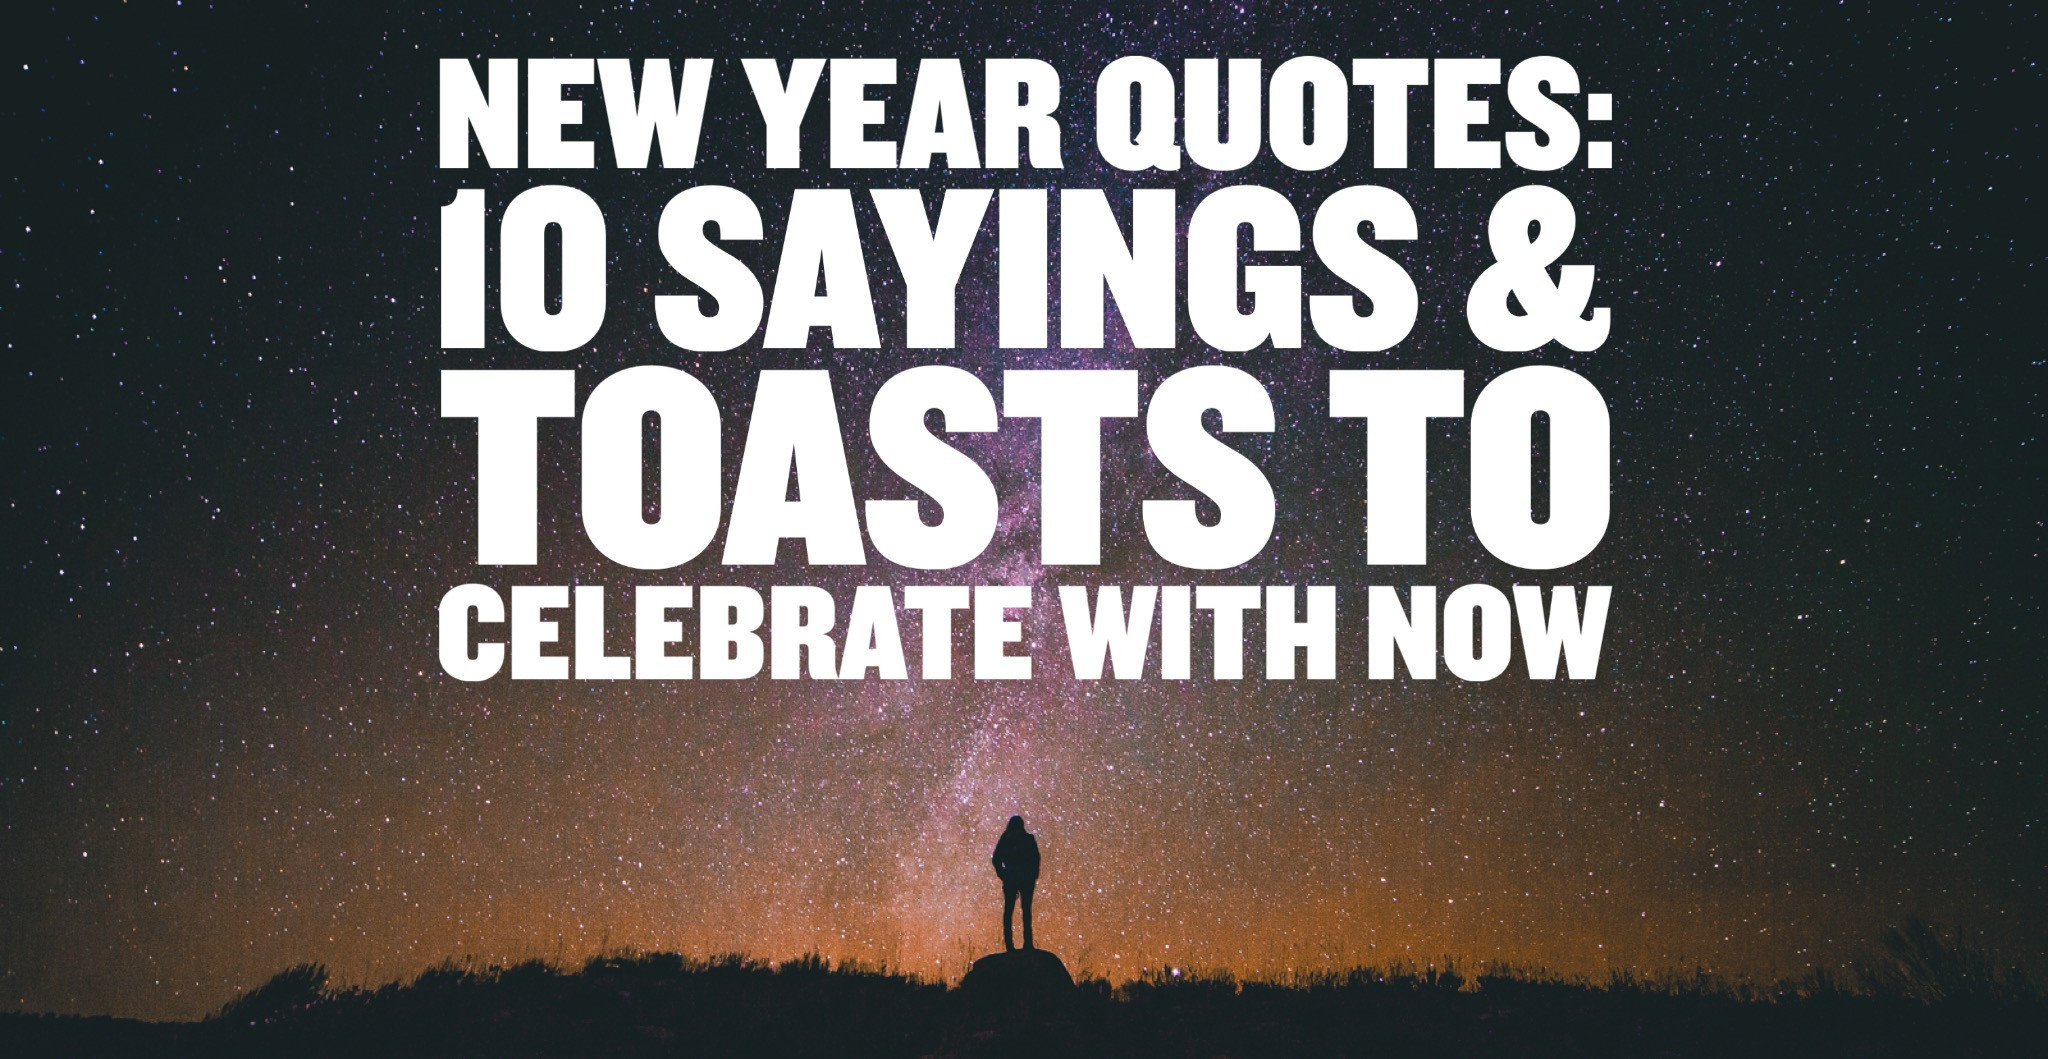 A New Year Quote
 New Year Quotes 10 Sayings & Toasts To Celebrate With